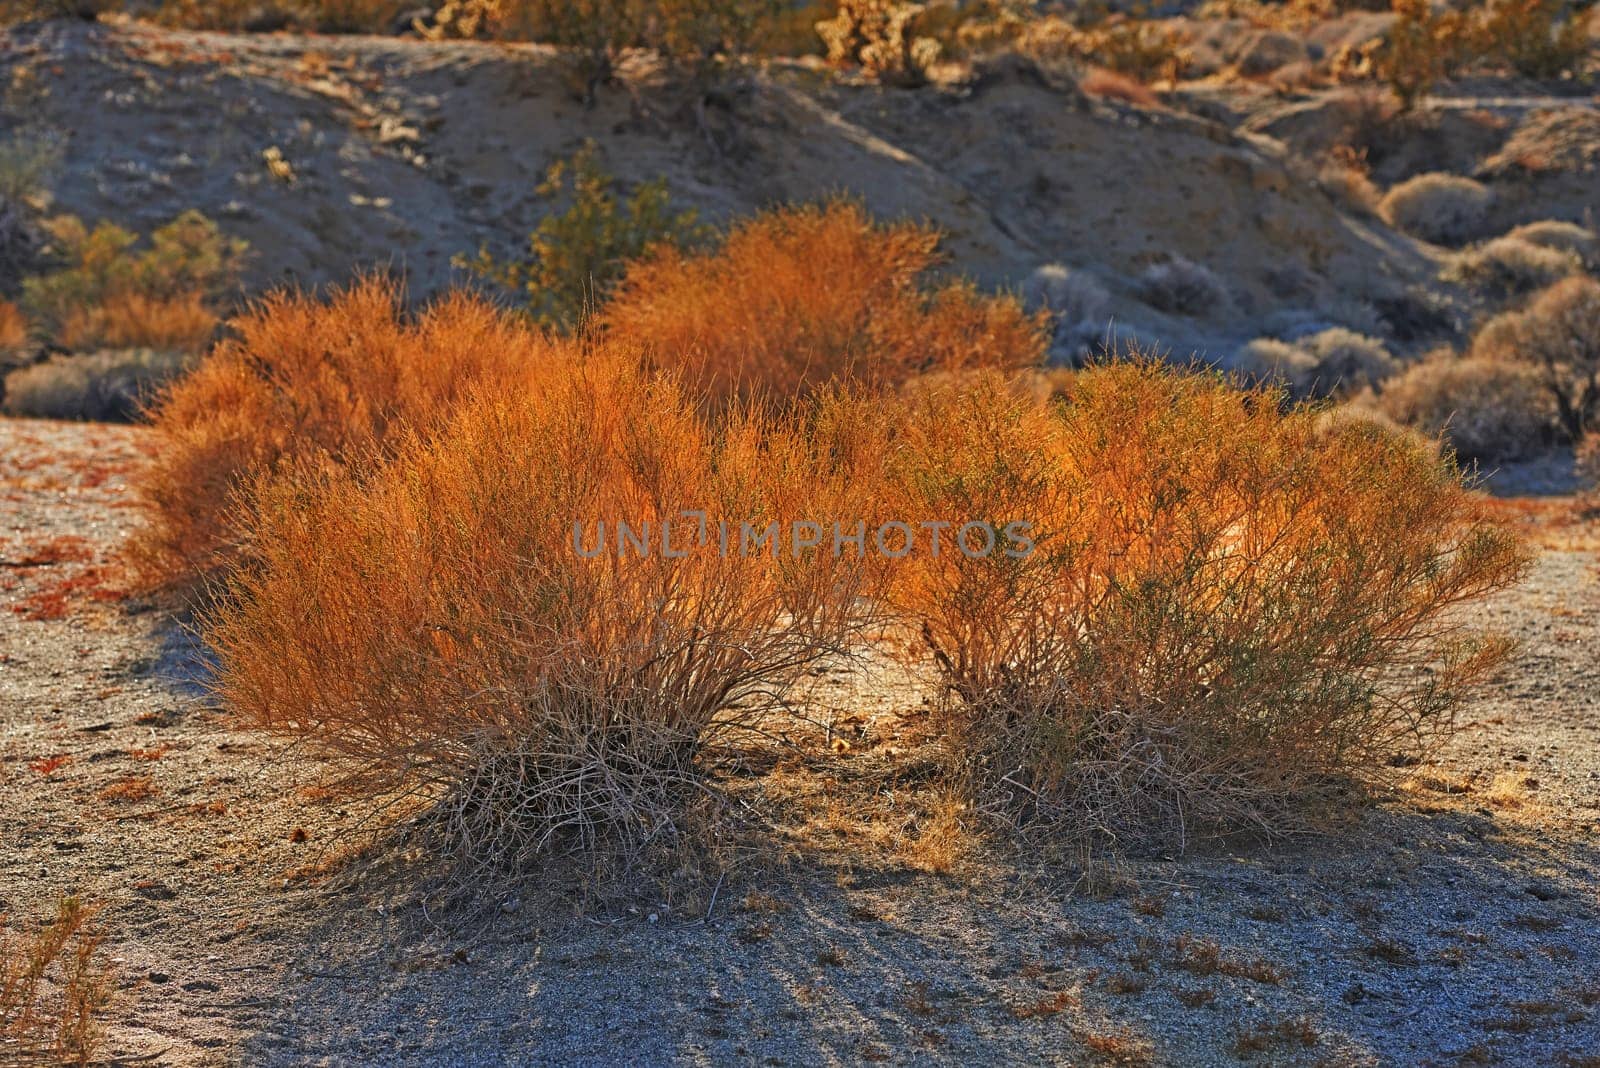 Desert, bush and shrub plants in environment outdoor in nature of California, USA. Native, ecology and growth of indigenous foliage in summer with biodiversity in dry field, soil and grass on land.